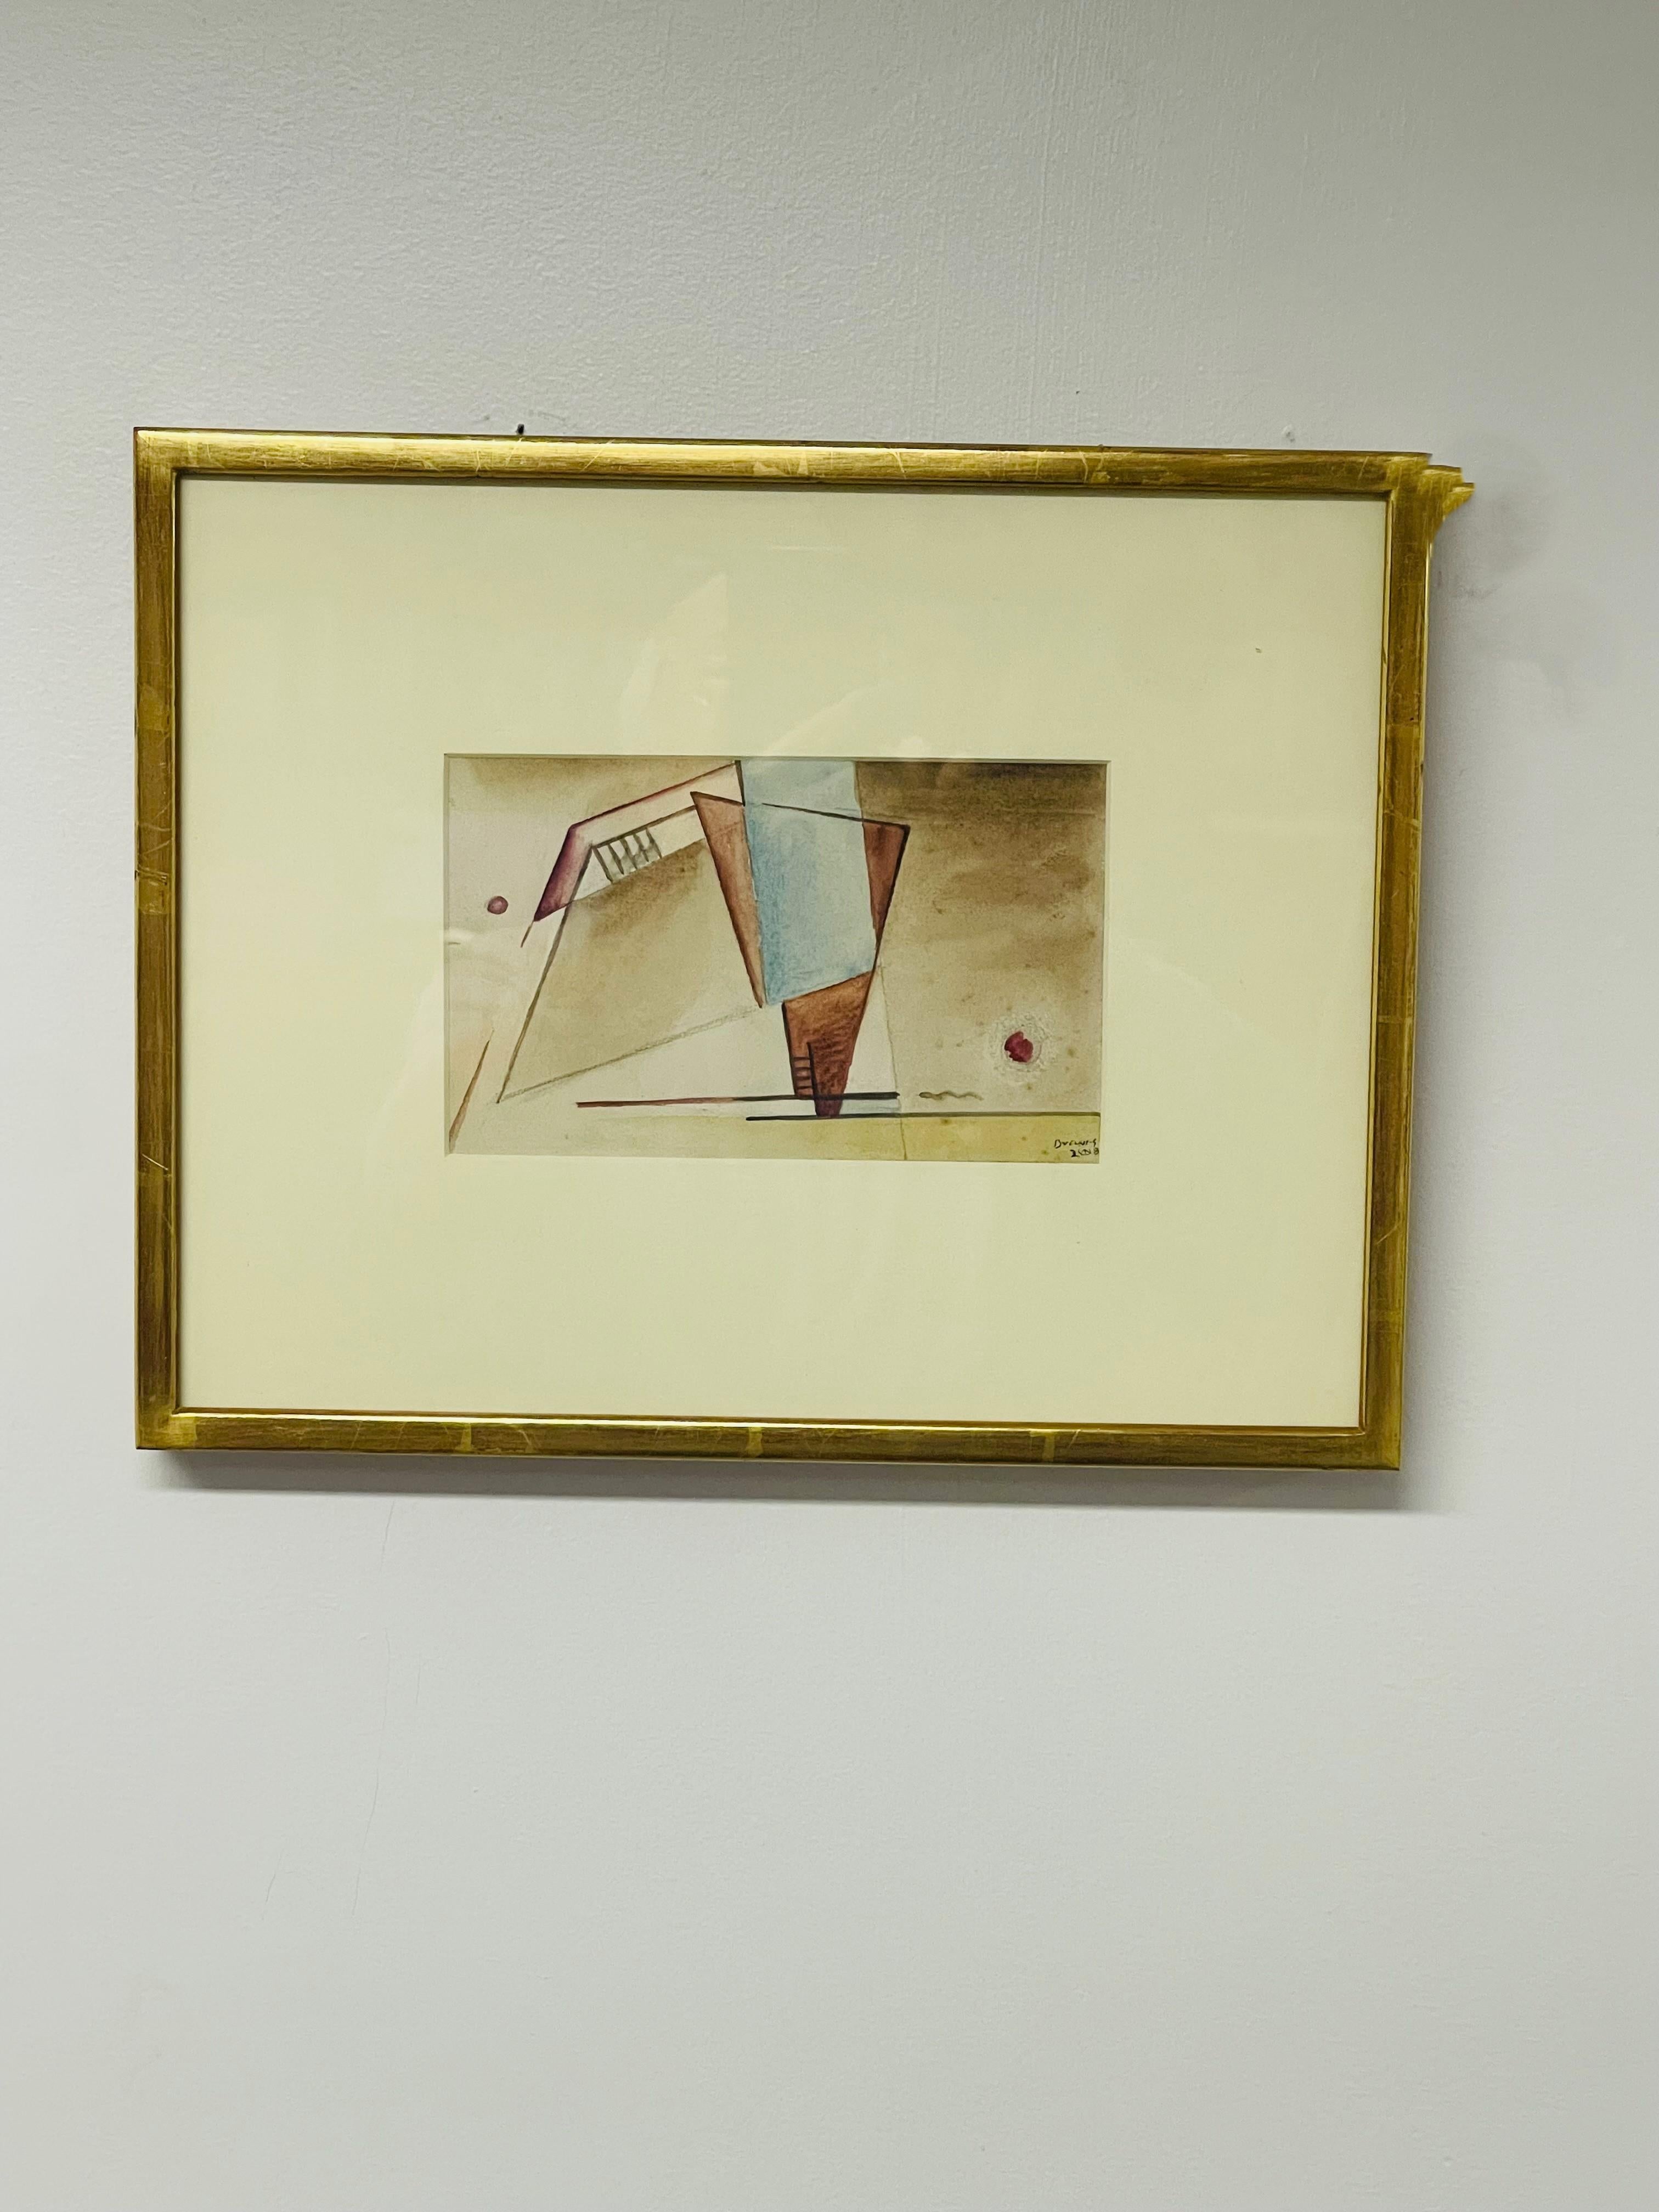 Construction with Vertical Center, A.4 - Art by Werner Drewes